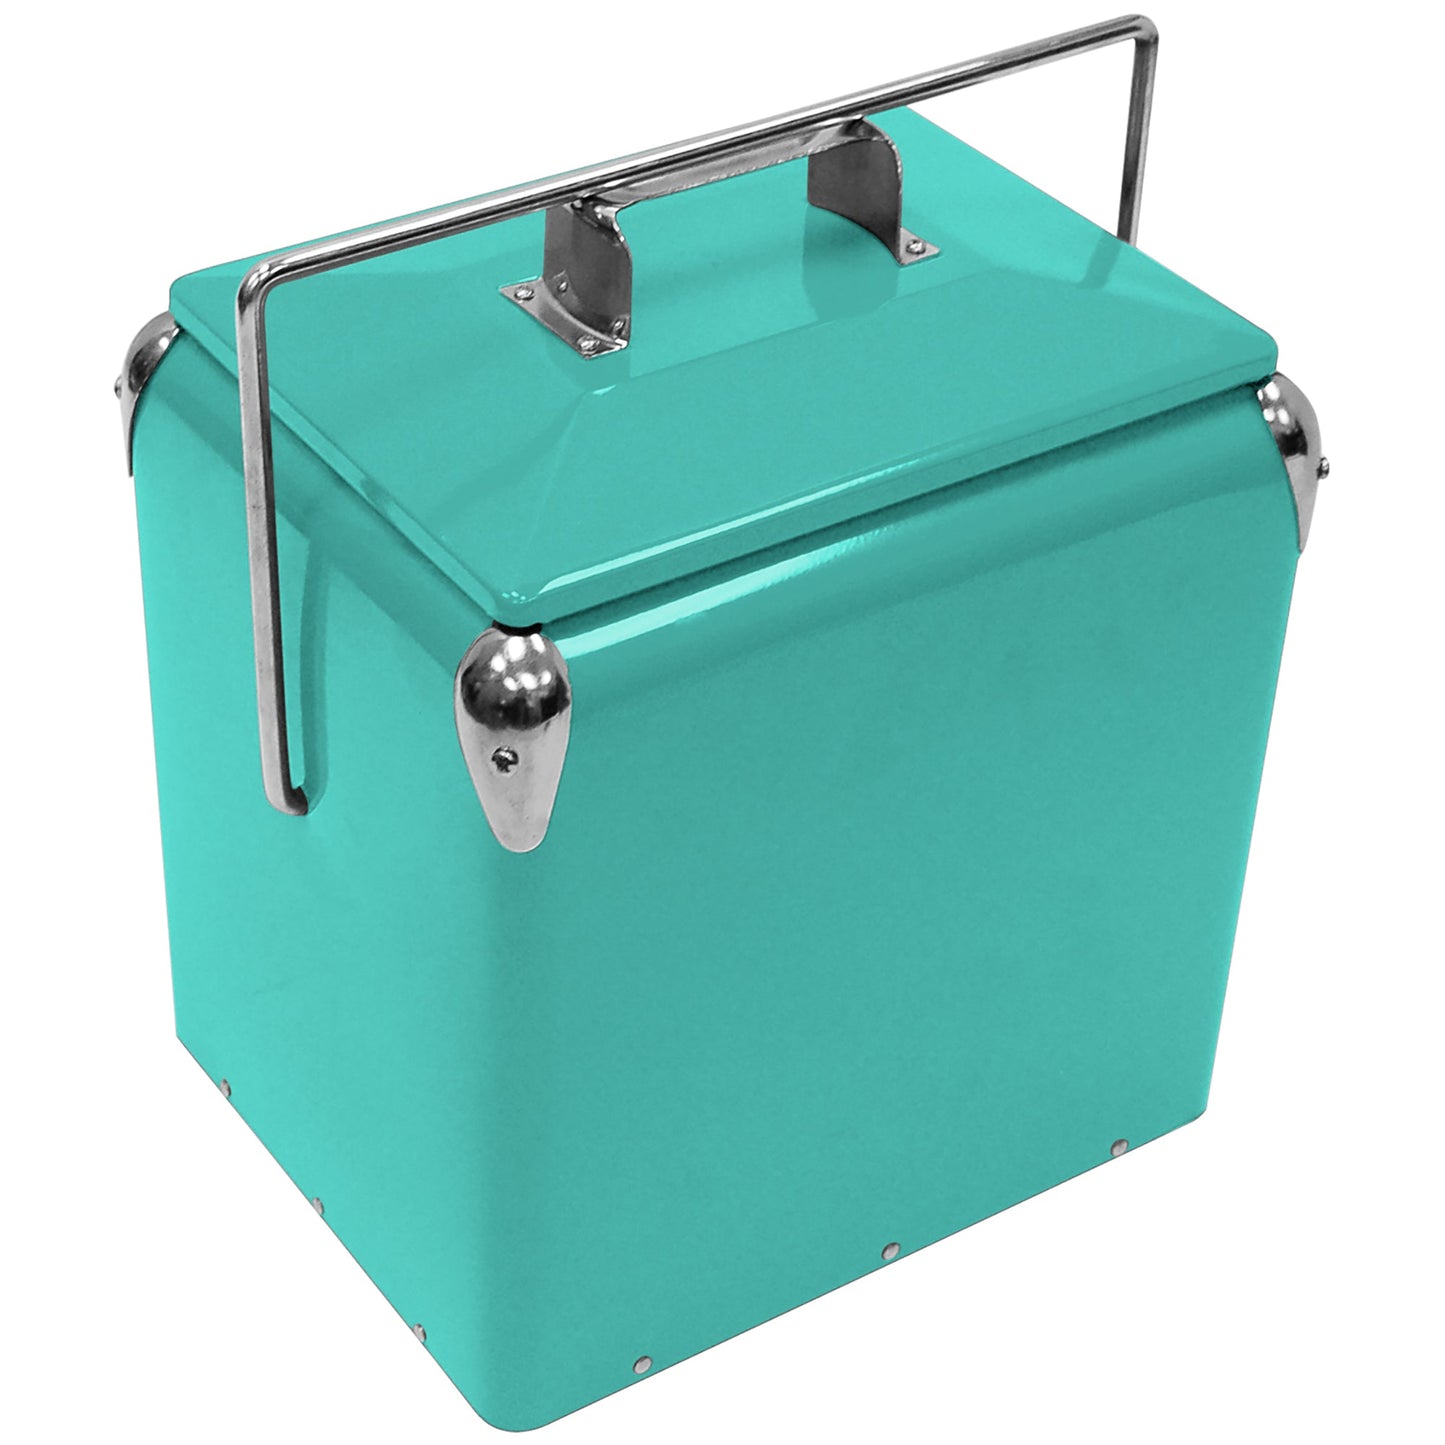 retro-legacy-cooler-in-teal